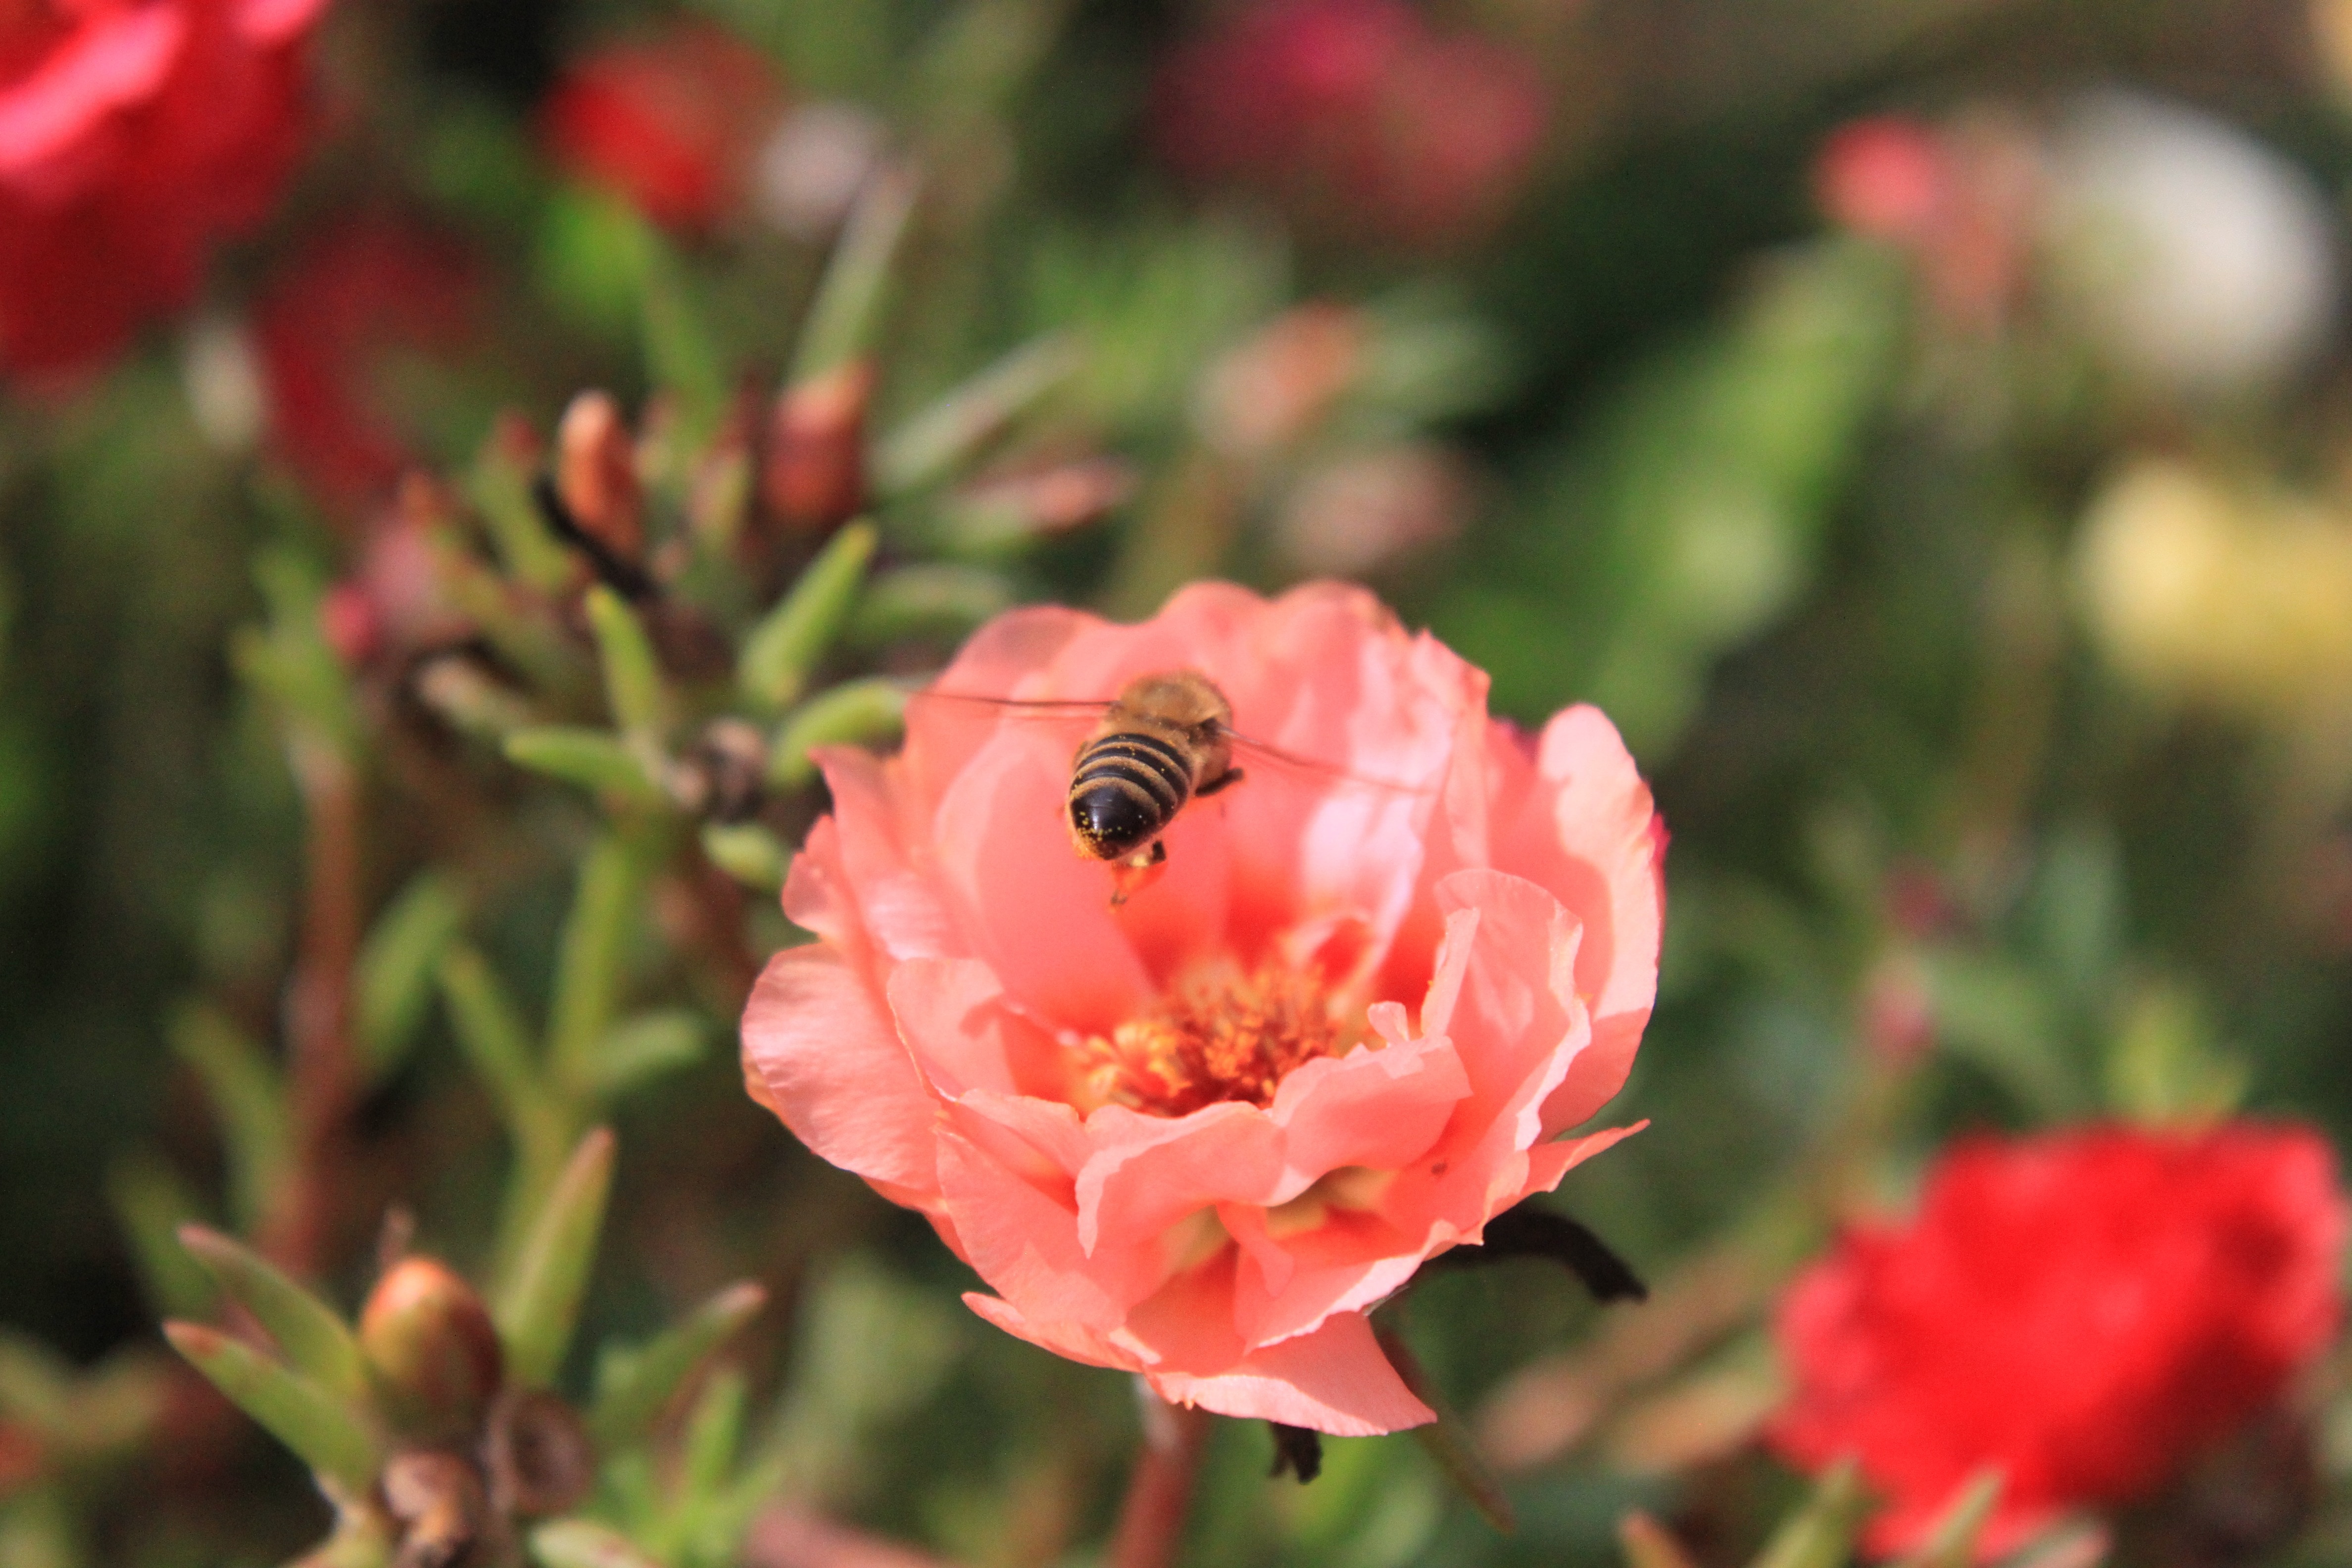 yellow and black bee flying through pink flower